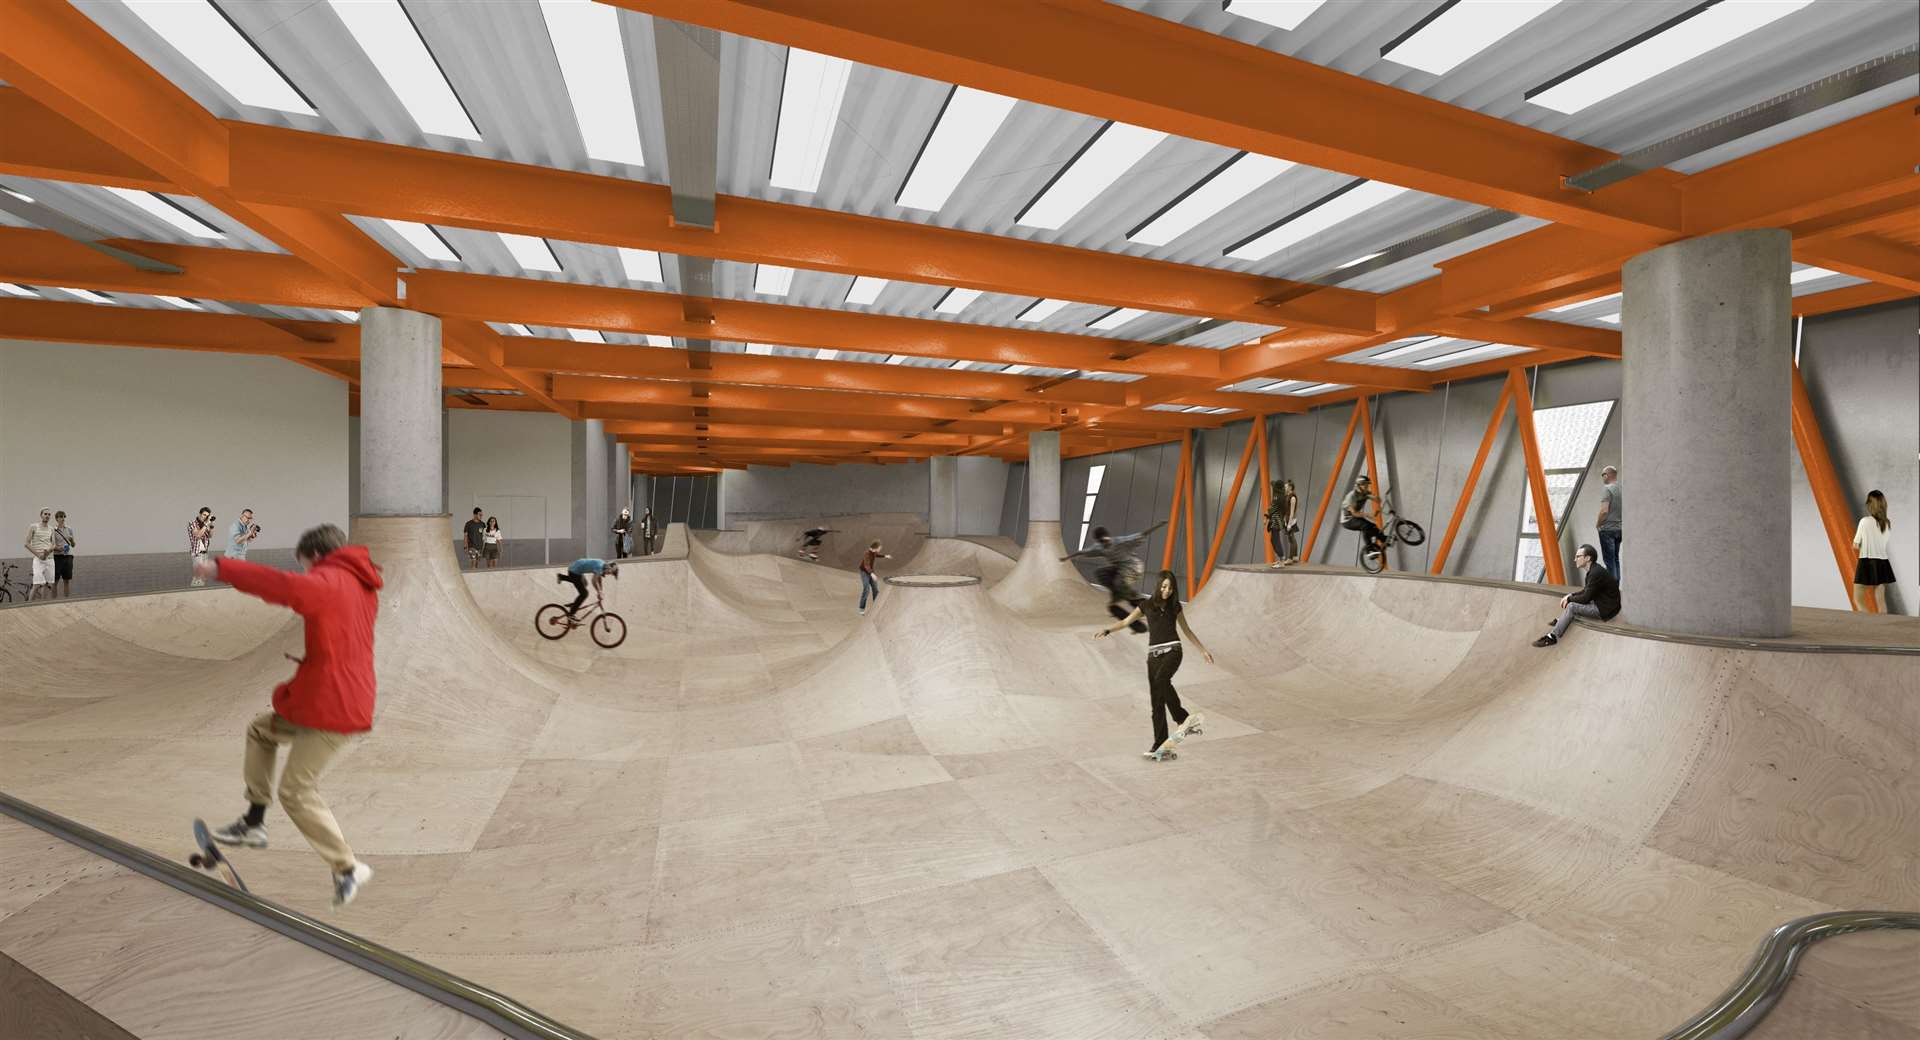 It will feature an indoor skating centre built over several floors